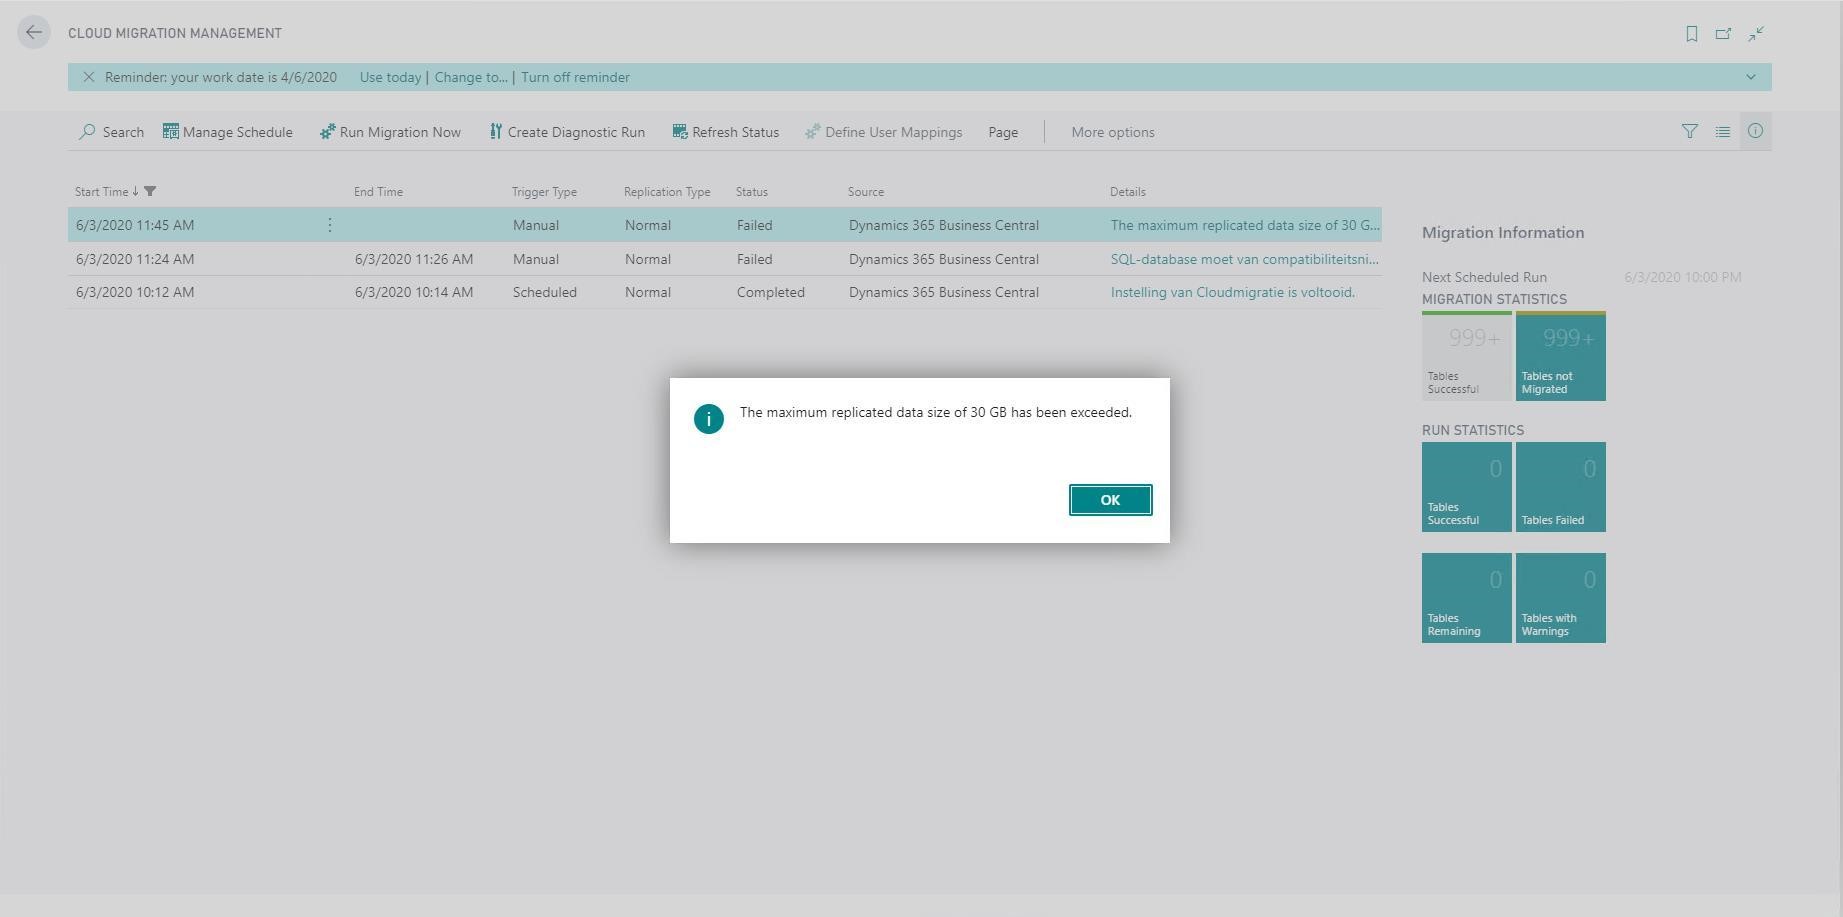 Figure 1. Error message in Dynamics 365 Business Central SaaS